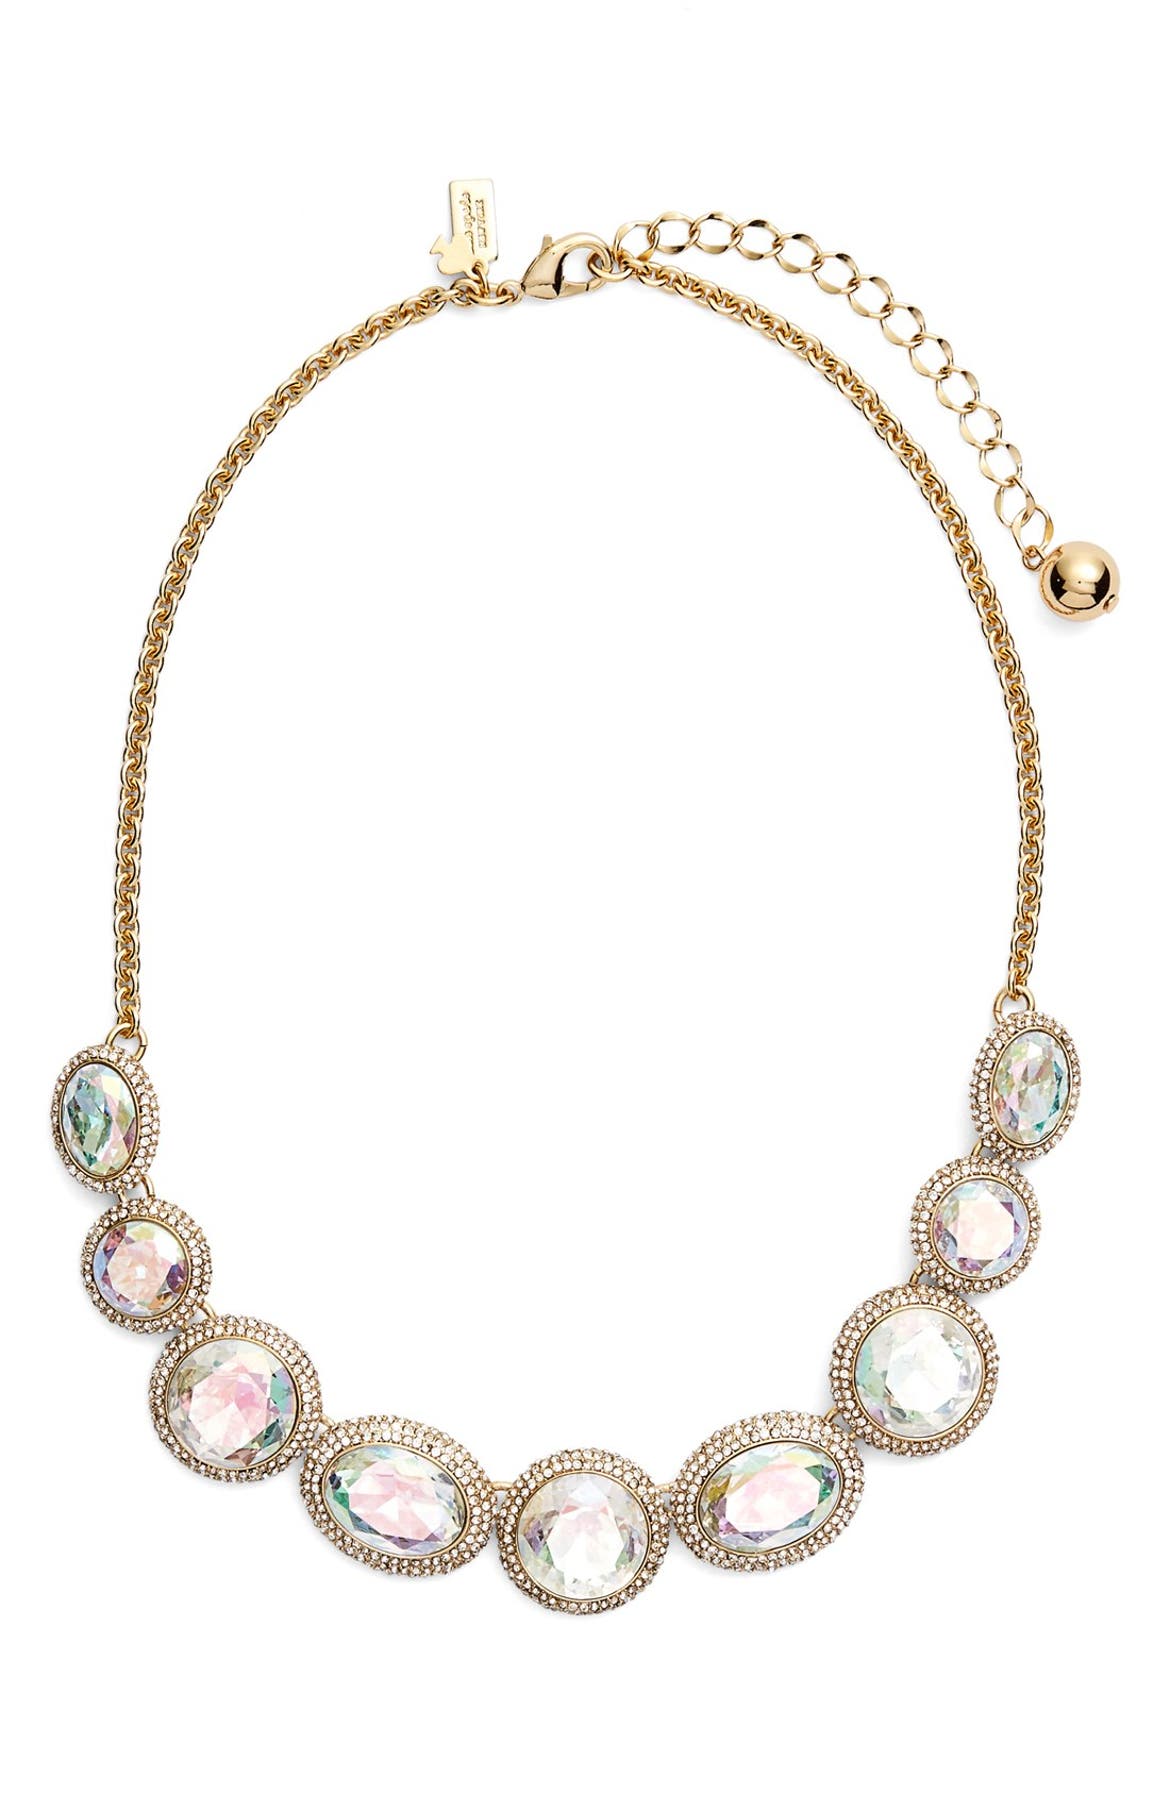 kate spade new york 'absolute sparkle' collar necklace | Nordstrom